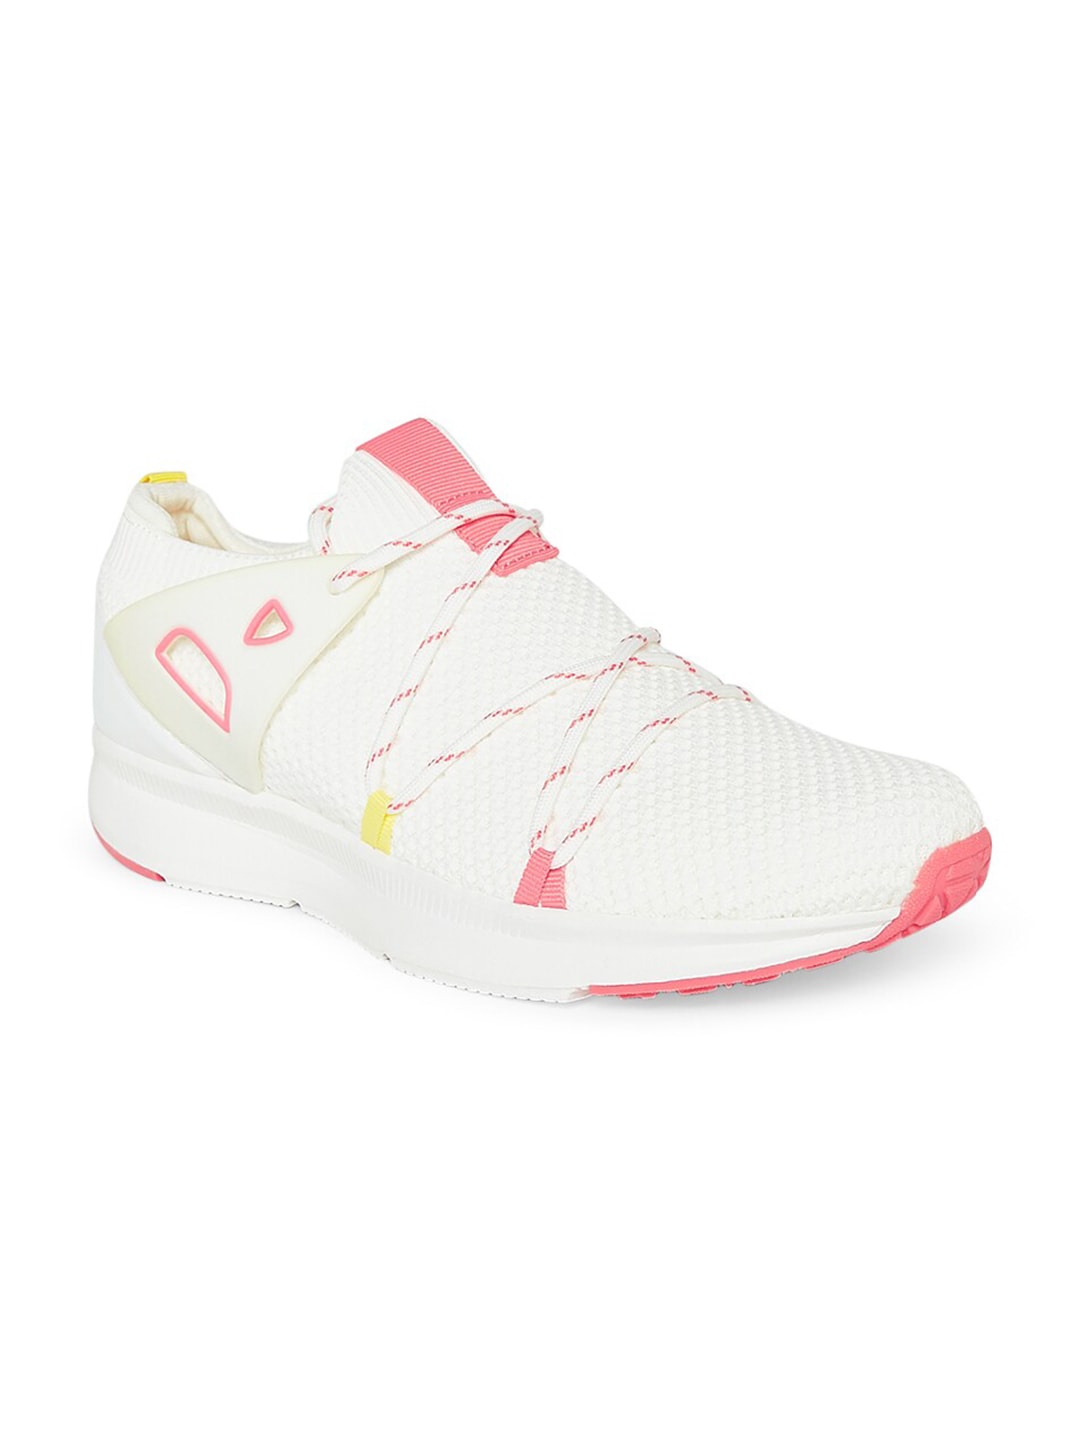 Forever Glam by Pantaloons Women White Textile Running Non-Marking Shoes Price in India